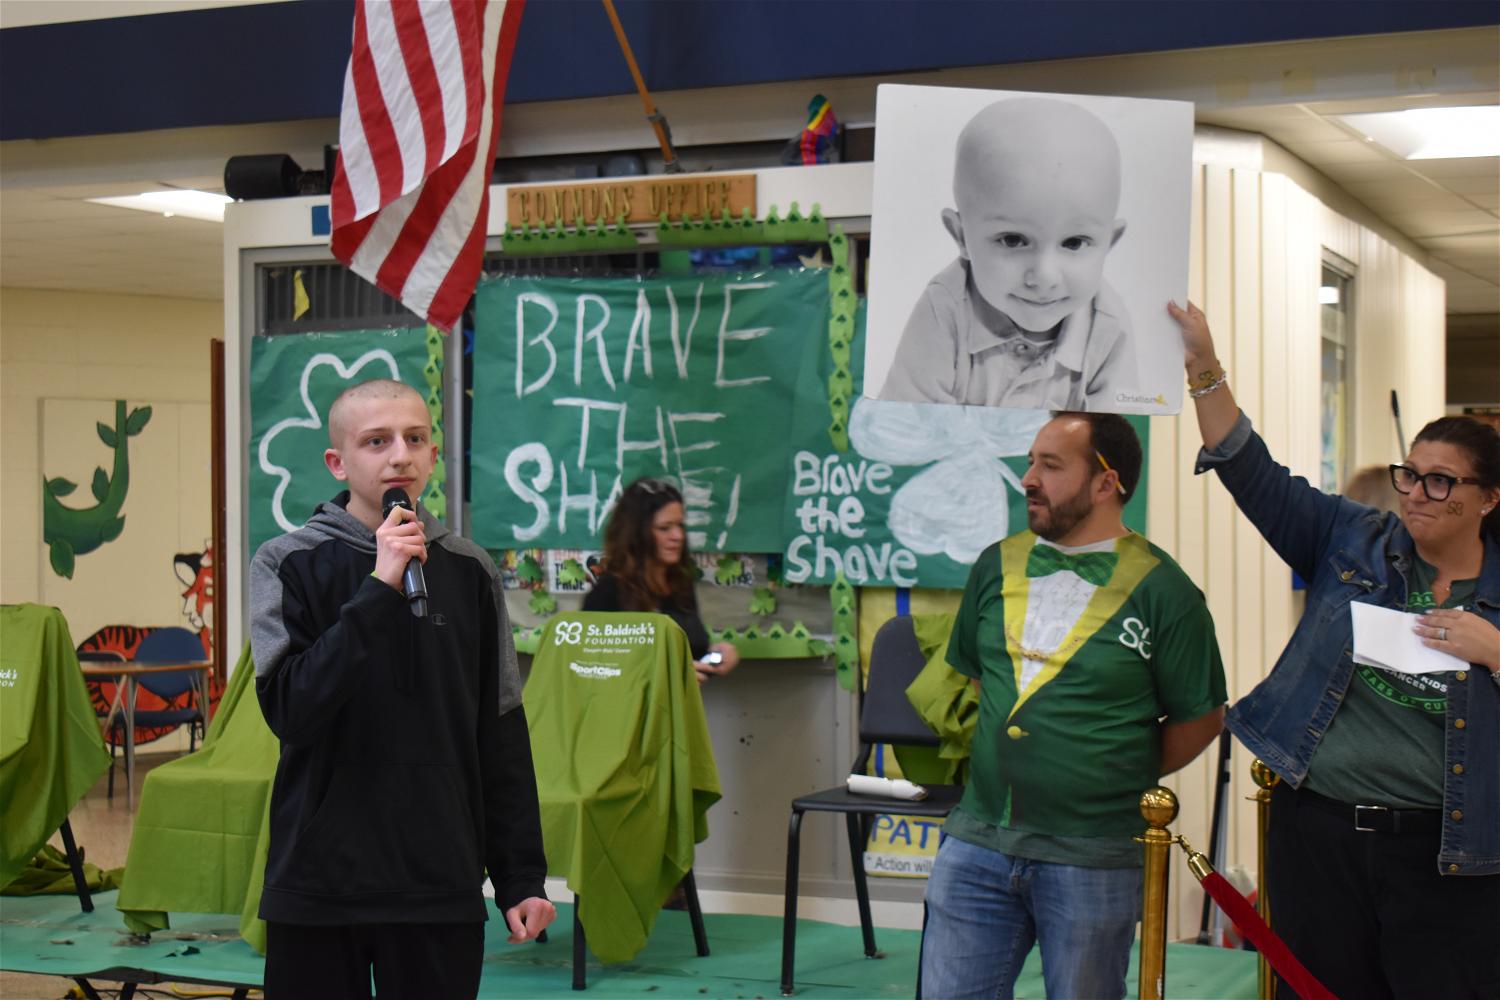 NHS student and cancer survivor Christian Sloan addresses the crowd after having his head shaved. Photo courtesy of the Northport-East Northport school district.